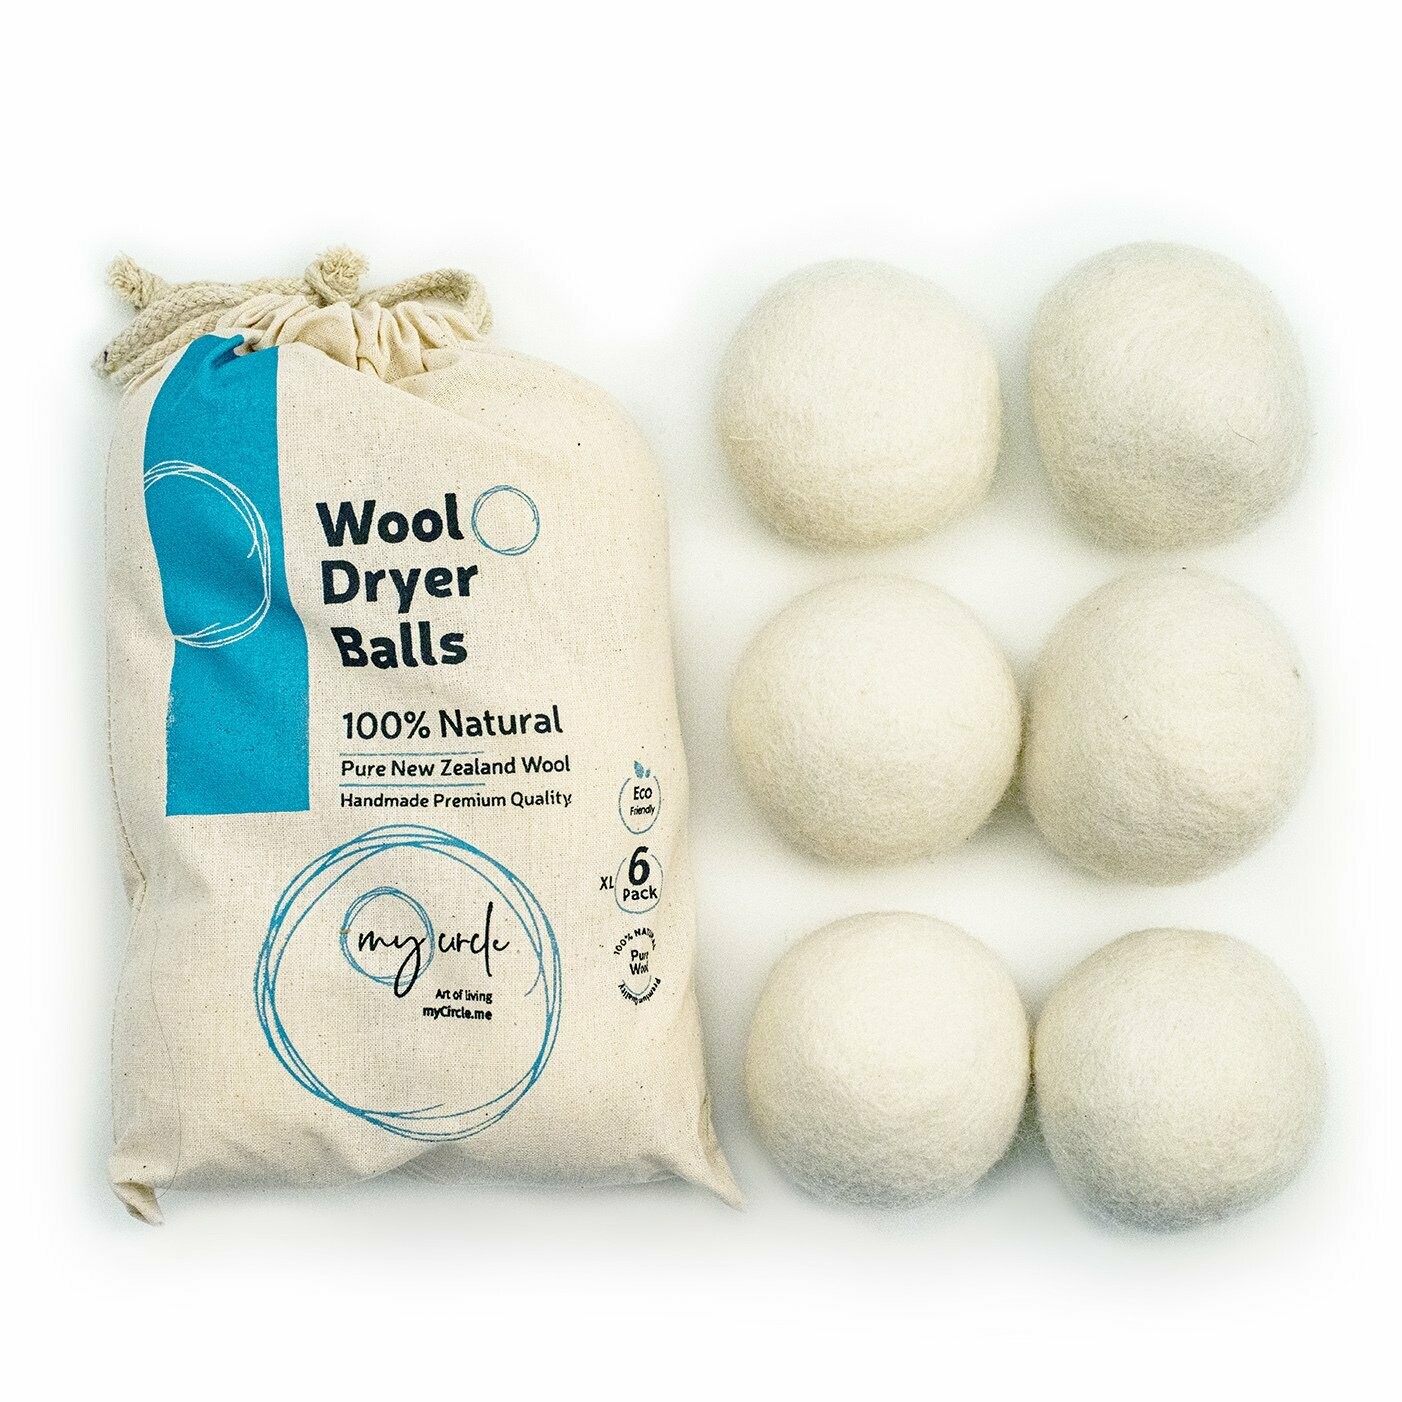 6 Wooly Tumbler Dryer Balls 100% Pure New Zealand Wool Eco Friendly,Save Money 